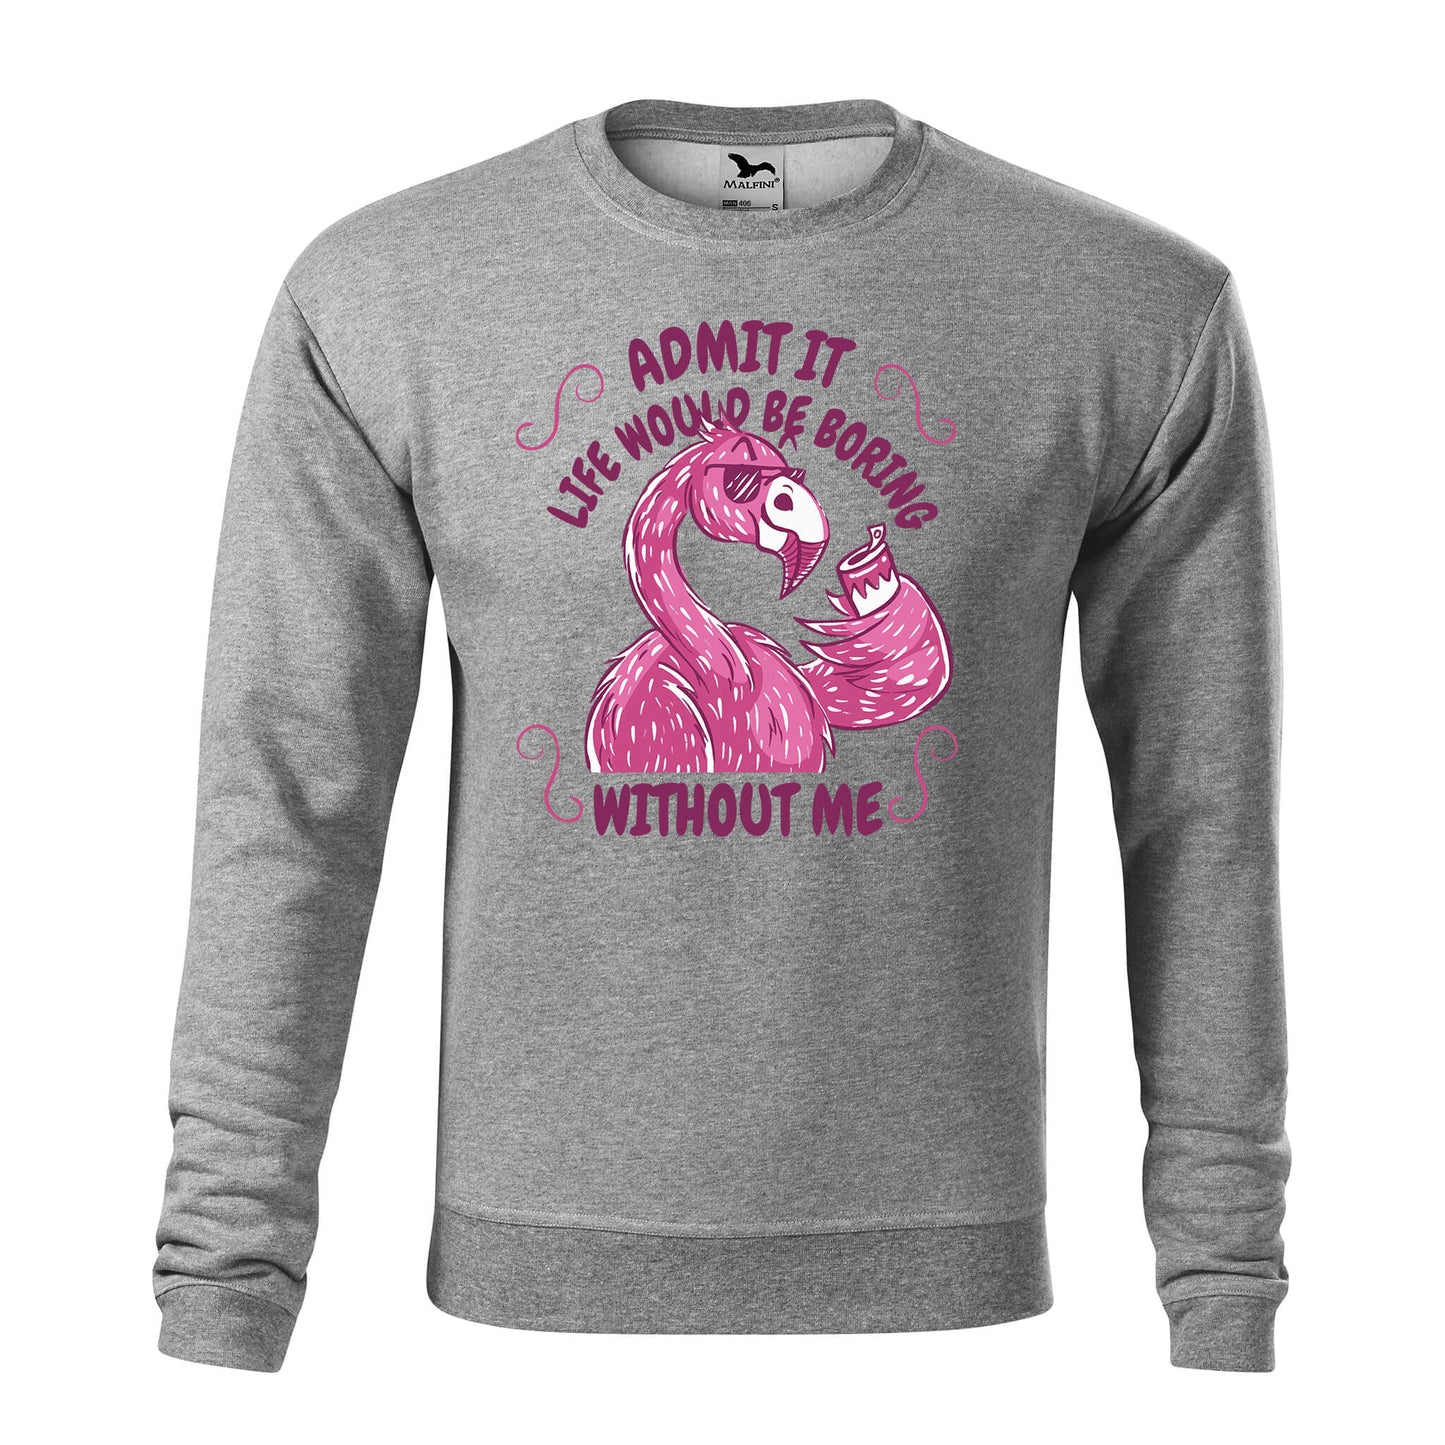 Life would be boring without me sweatshirt - mens